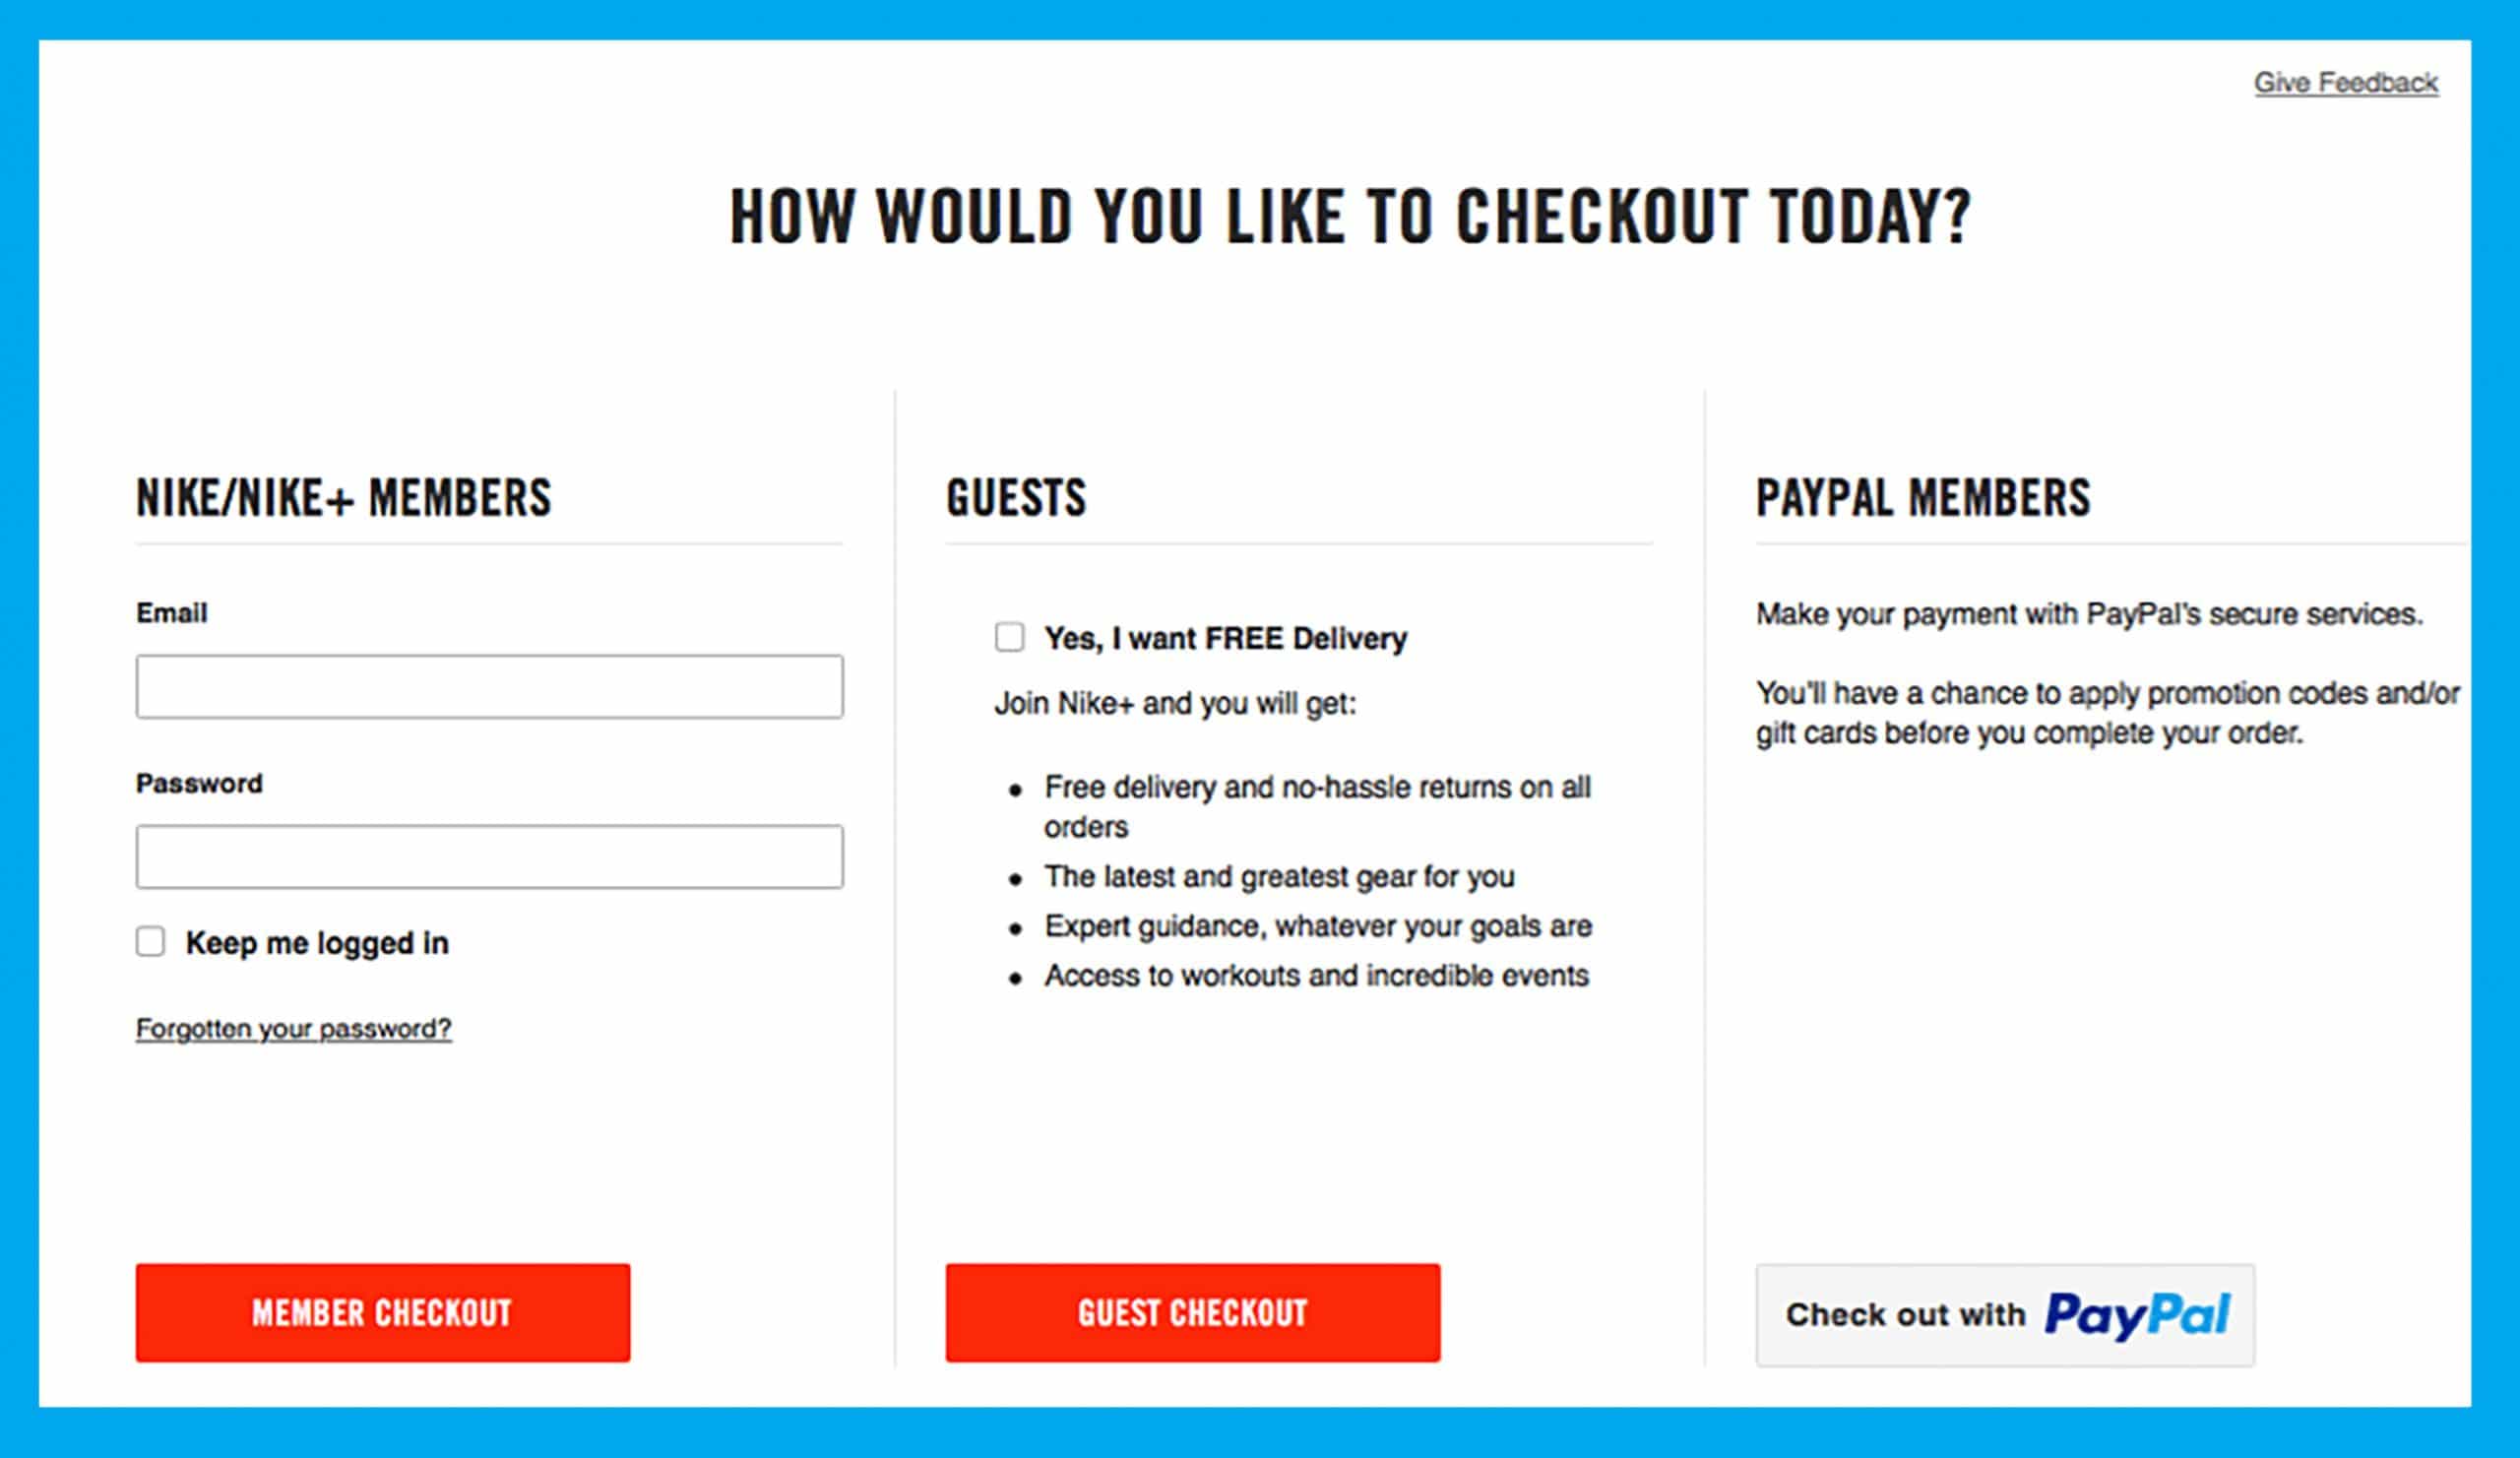 Nike provides various checkout options